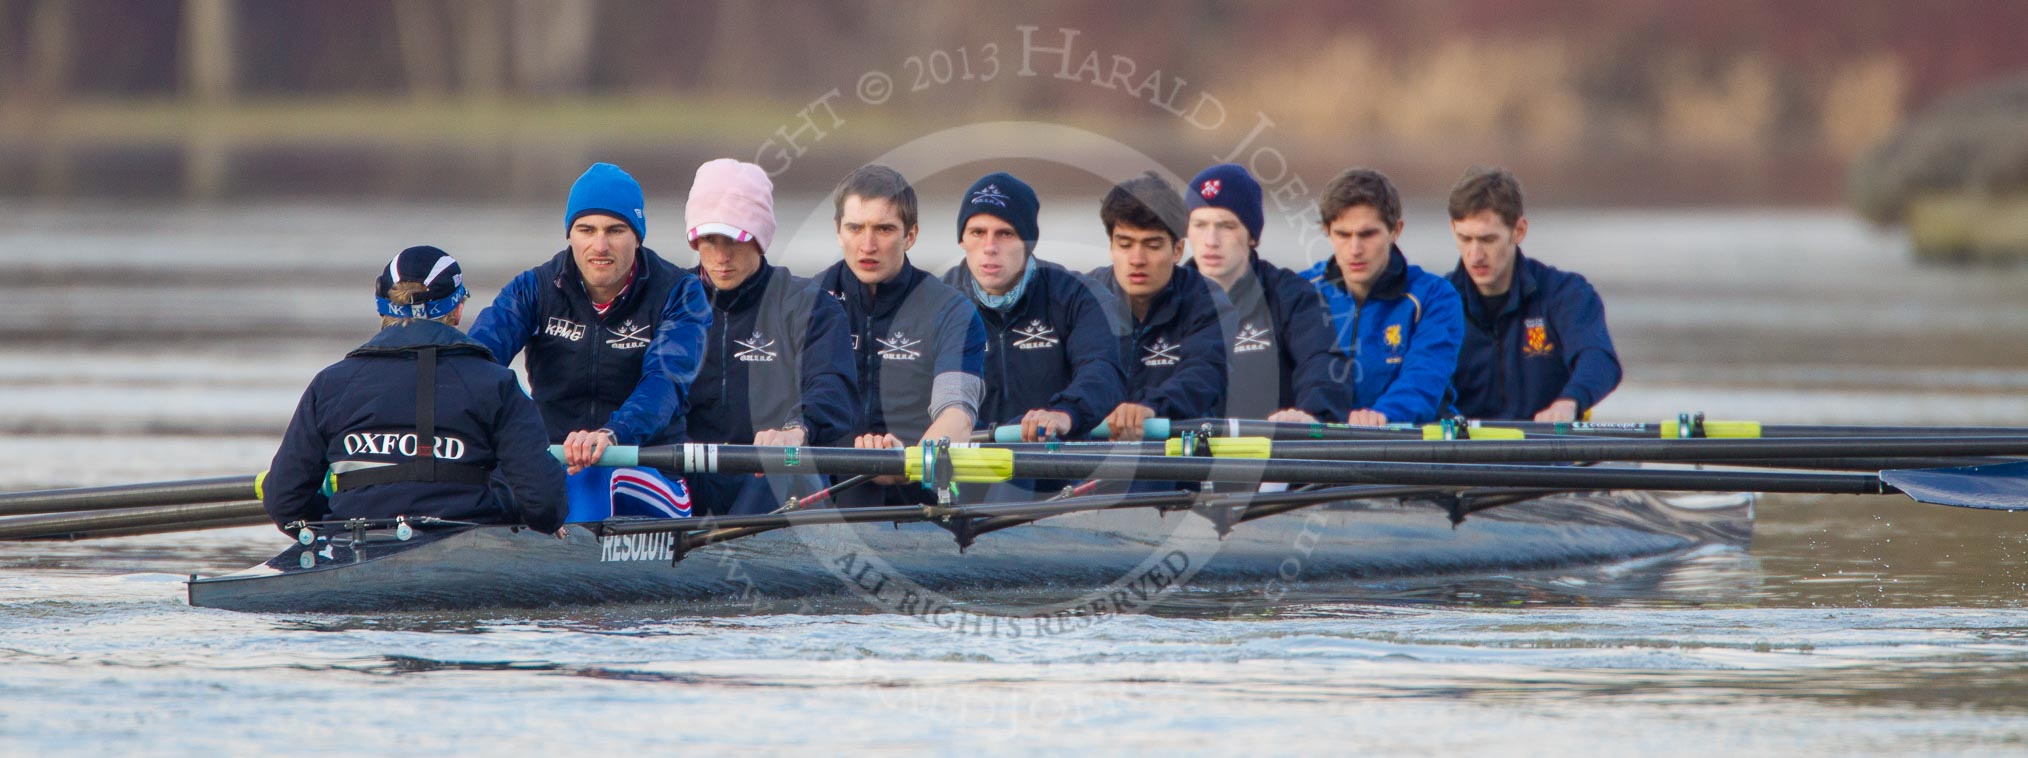 The Boat Race season 2013 - CUWBC training: The OULRC boat - cox Christian Proctor, stroke Max Dillon, 7 Andrew Sayce, 6 Benjamin Walpole, 5 Jasper Warner, 4 Frederick Foster, 3 Keir Macdonald, 2 Benjamin Bronselaer and bow James Kirkbride..
River Thames near Remenham,
Henley-on-Thames,
Oxfordshire,
United Kingdom,
on 19 March 2013 at 16:03, image #106